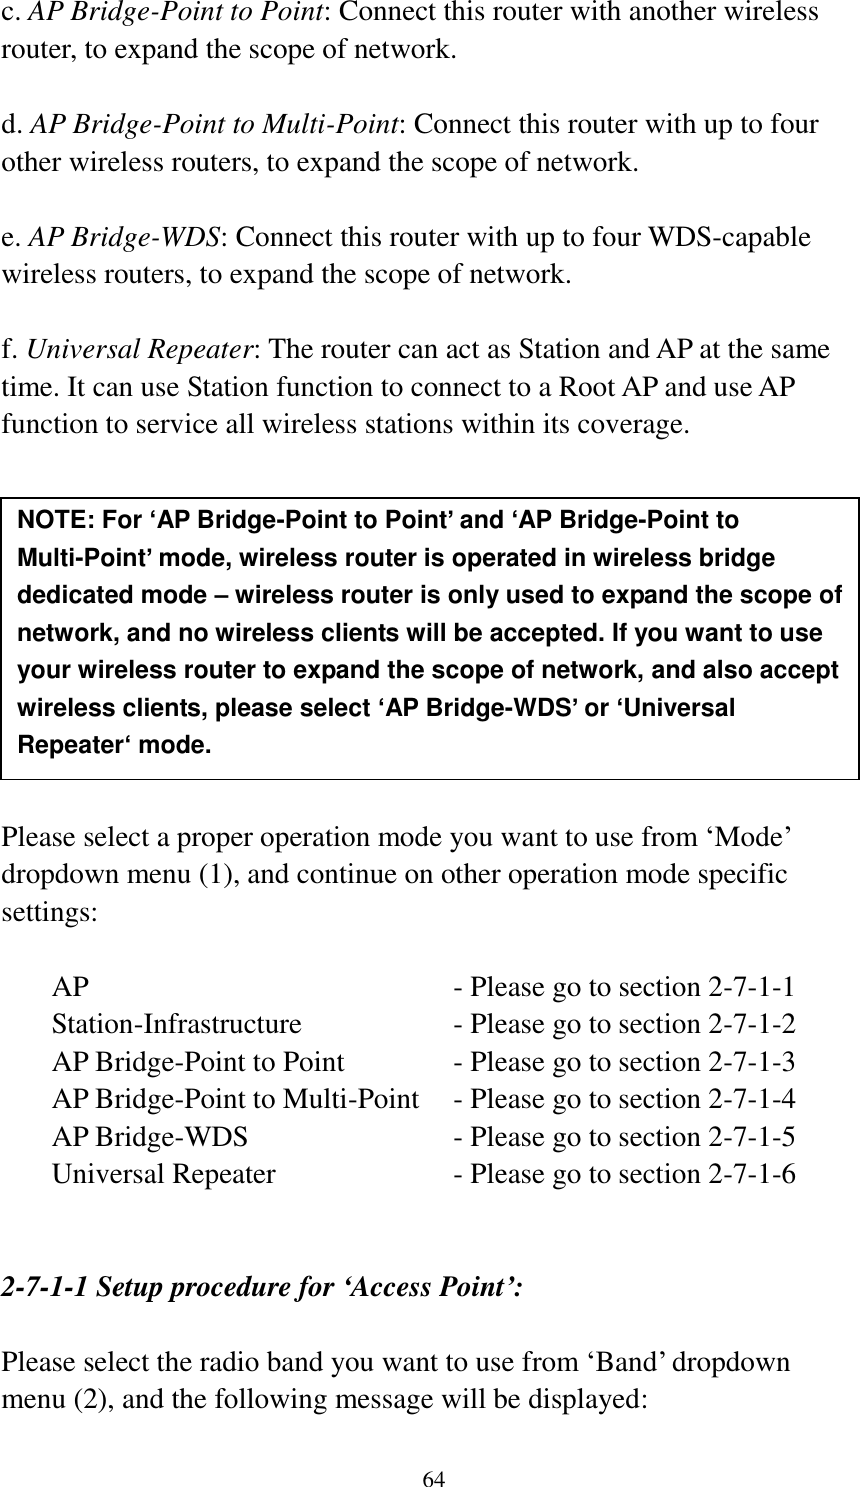 64 c. AP Bridge-Point to Point: Connect this router with another wireless router, to expand the scope of network.    d. AP Bridge-Point to Multi-Point: Connect this router with up to four other wireless routers, to expand the scope of network.  e. AP Bridge-WDS: Connect this router with up to four WDS-capable wireless routers, to expand the scope of network.  f. Universal Repeater: The router can act as Station and AP at the same time. It can use Station function to connect to a Root AP and use AP function to service all wireless stations within its coverage.           Please select a proper operation mode you want to use from „Mode‟ dropdown menu (1), and continue on other operation mode specific settings:  AP                - Please go to section 2-7-1-1 Station-Infrastructure        - Please go to section 2-7-1-2 AP Bridge-Point to Point     - Please go to section 2-7-1-3 AP Bridge-Point to Multi-Point  - Please go to section 2-7-1-4 AP Bridge-WDS         - Please go to section 2-7-1-5 Universal Repeater          - Please go to section 2-7-1-6   2-7-1-1 Setup procedure for ‘Access Point’:  Please select the radio band you want to use from „Band‟ dropdown menu (2), and the following message will be displayed: NOTE: For ‘AP Bridge-Point to Point’ and ‘AP Bridge-Point to Multi-Point’ mode, wireless router is operated in wireless bridge dedicated mode – wireless router is only used to expand the scope of network, and no wireless clients will be accepted. If you want to use your wireless router to expand the scope of network, and also accept wireless clients, please select ‘AP Bridge-WDS’ or ‘Universal Repeater‘ mode. 